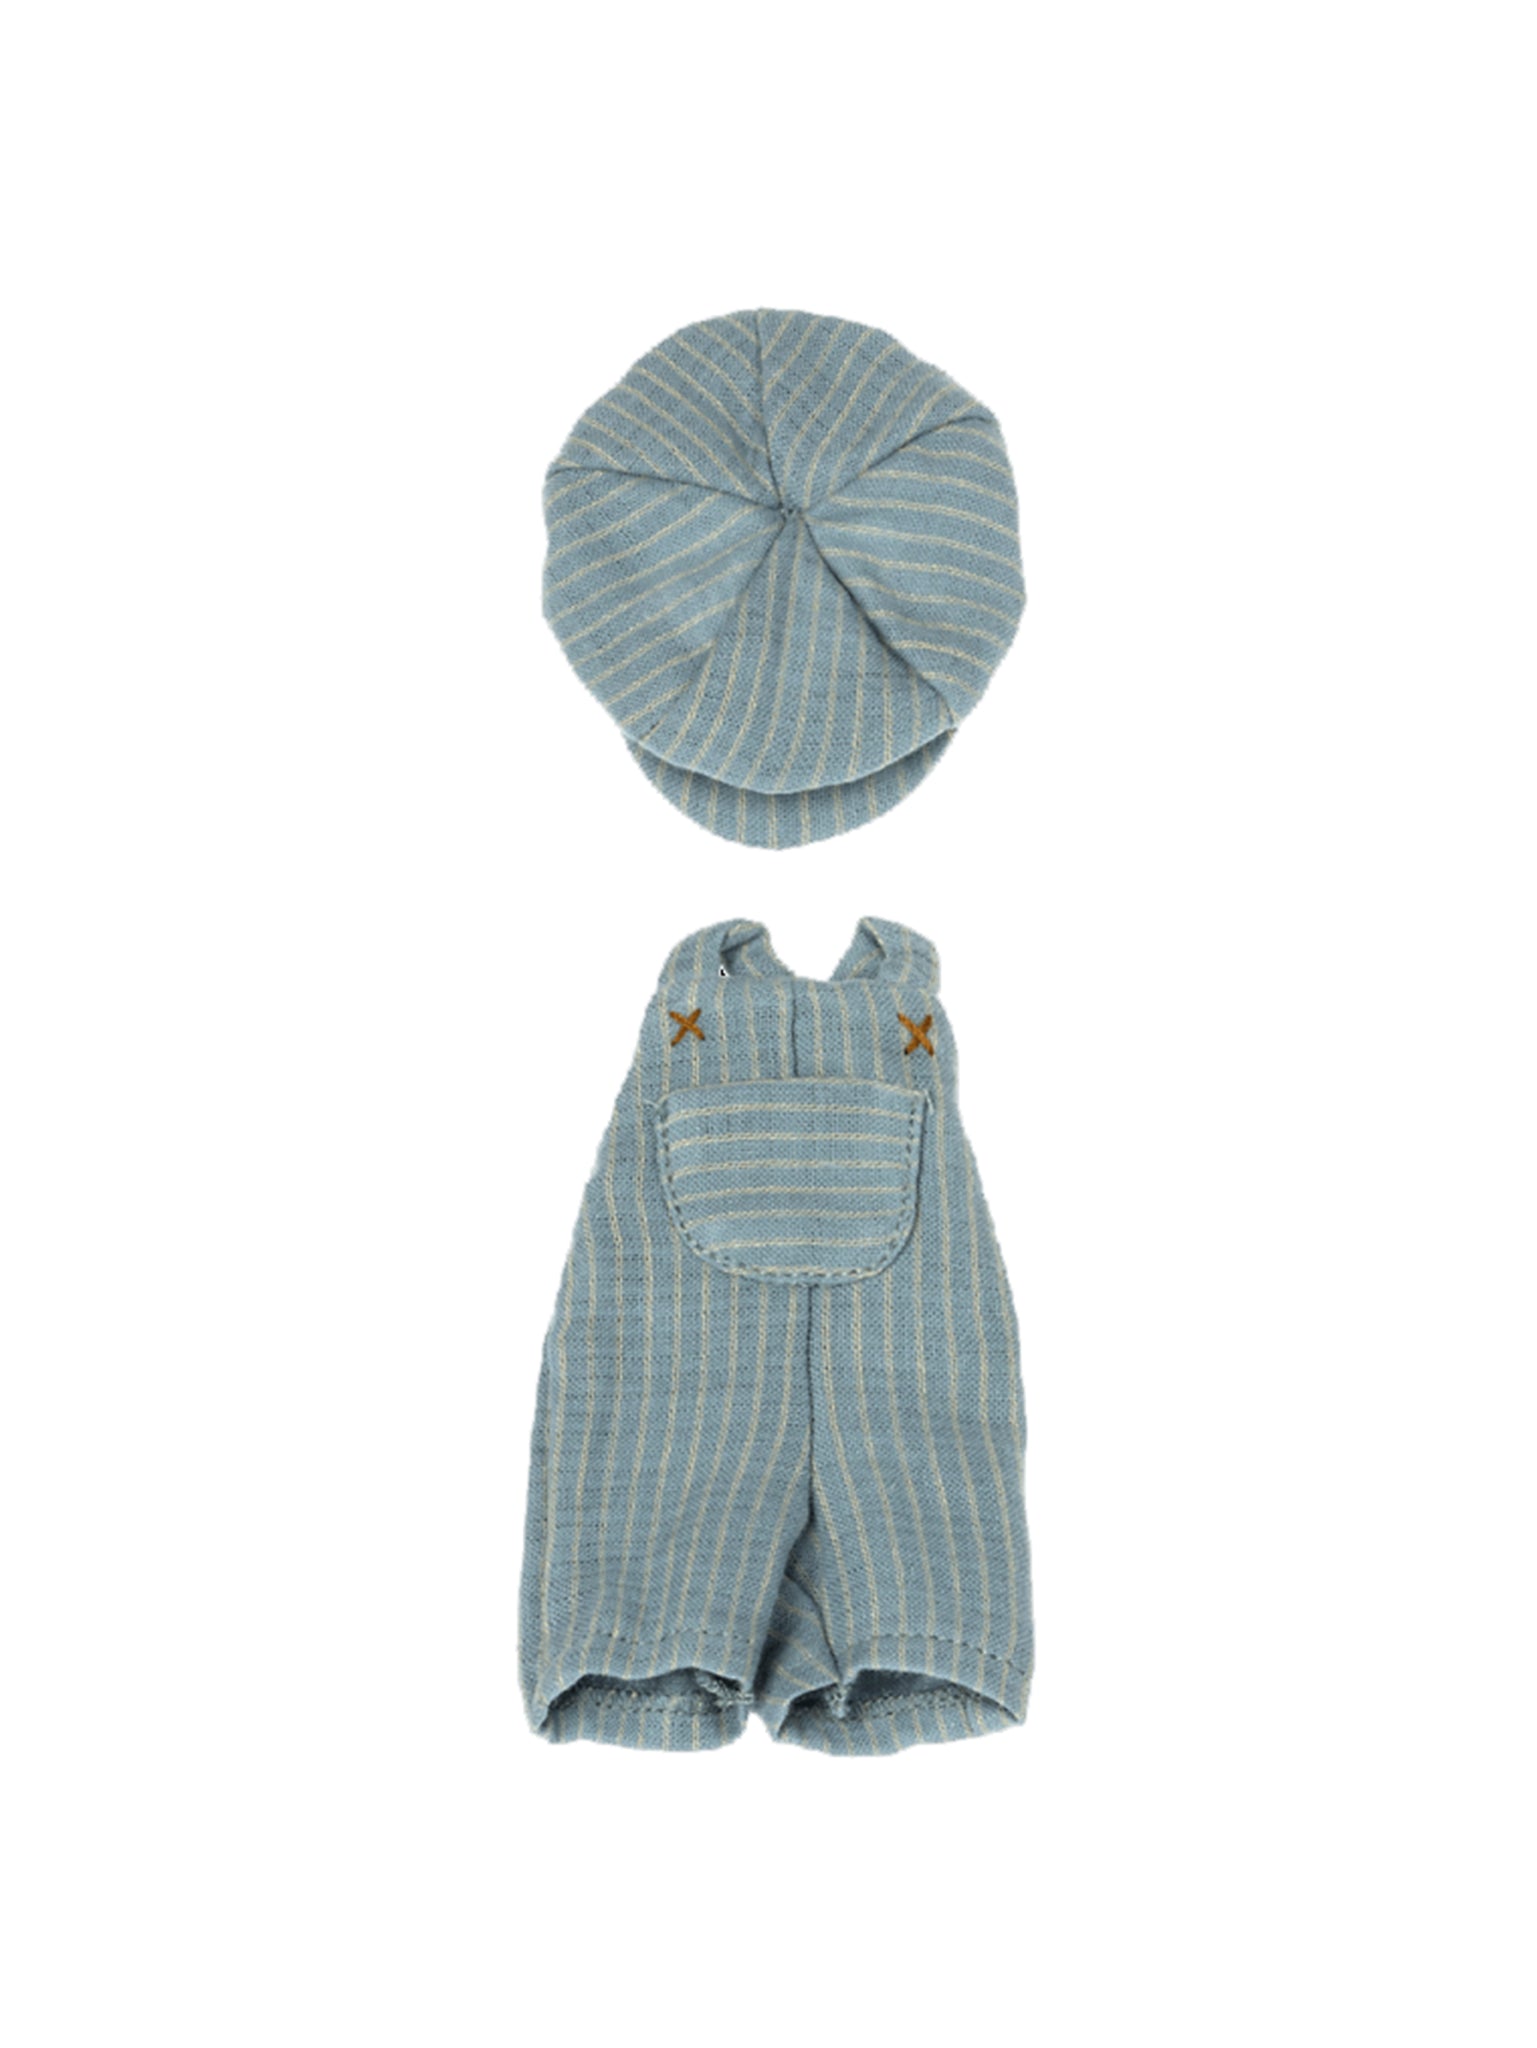 Maileg Overall and Cap for Teddy Junior Weston Table